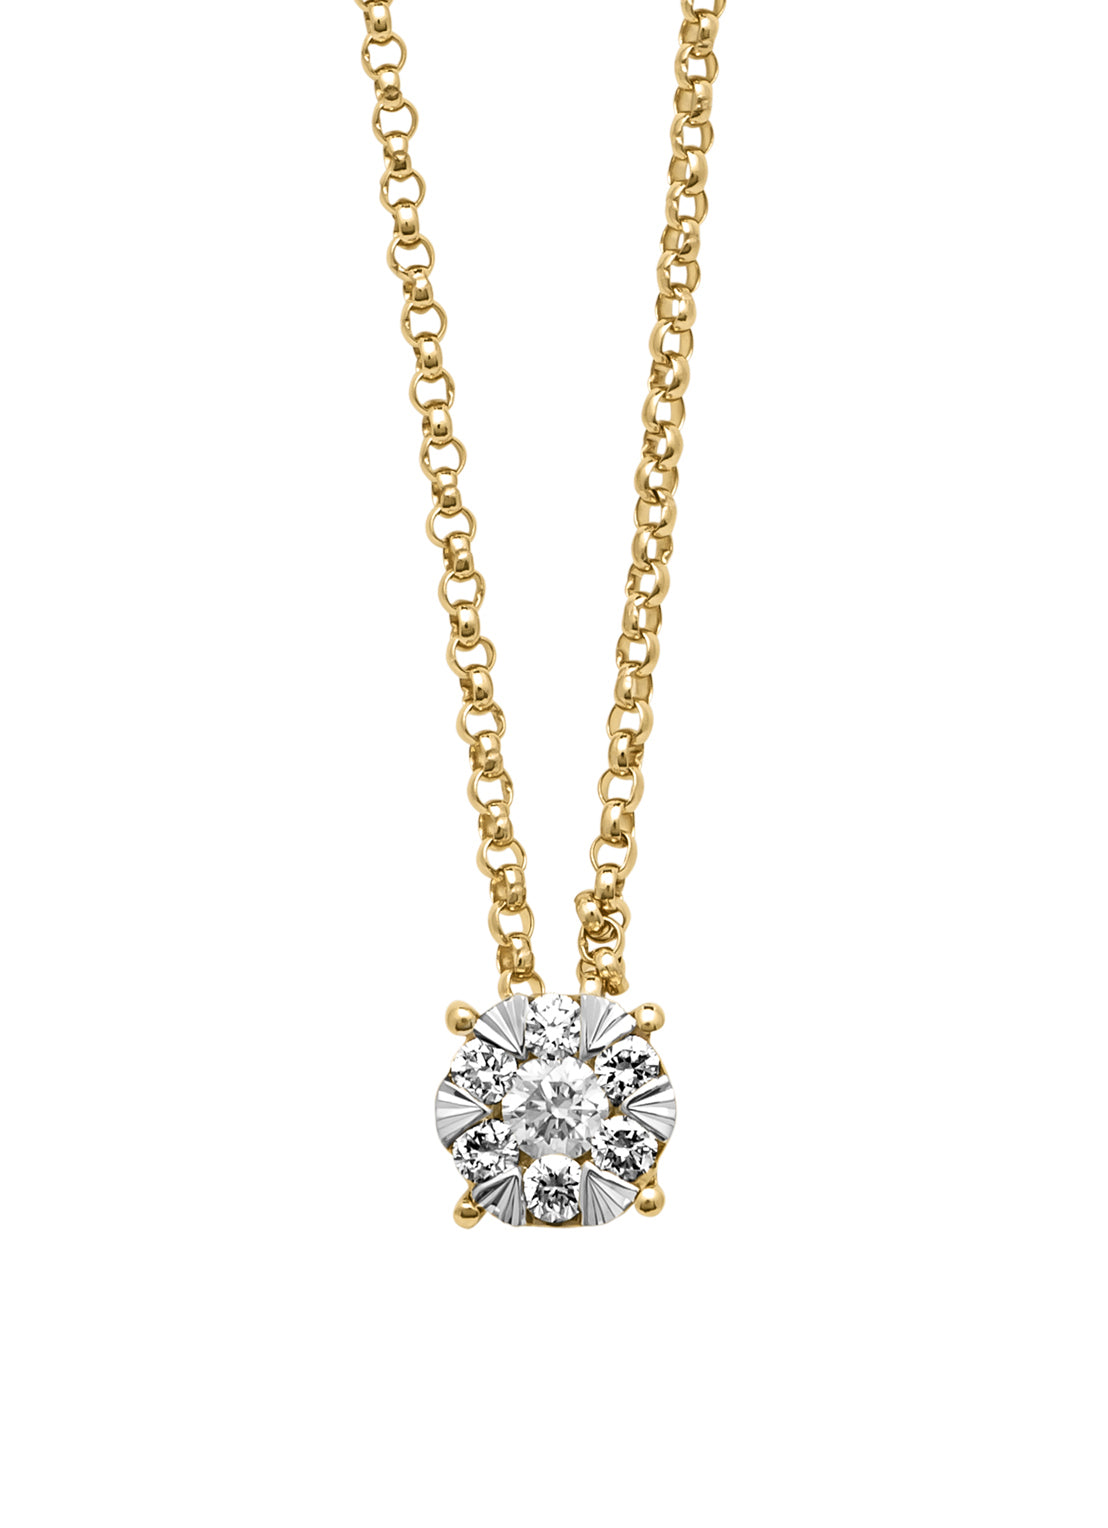 Golden pendant with necklace, 0.14 CT Diamond, Enchanted